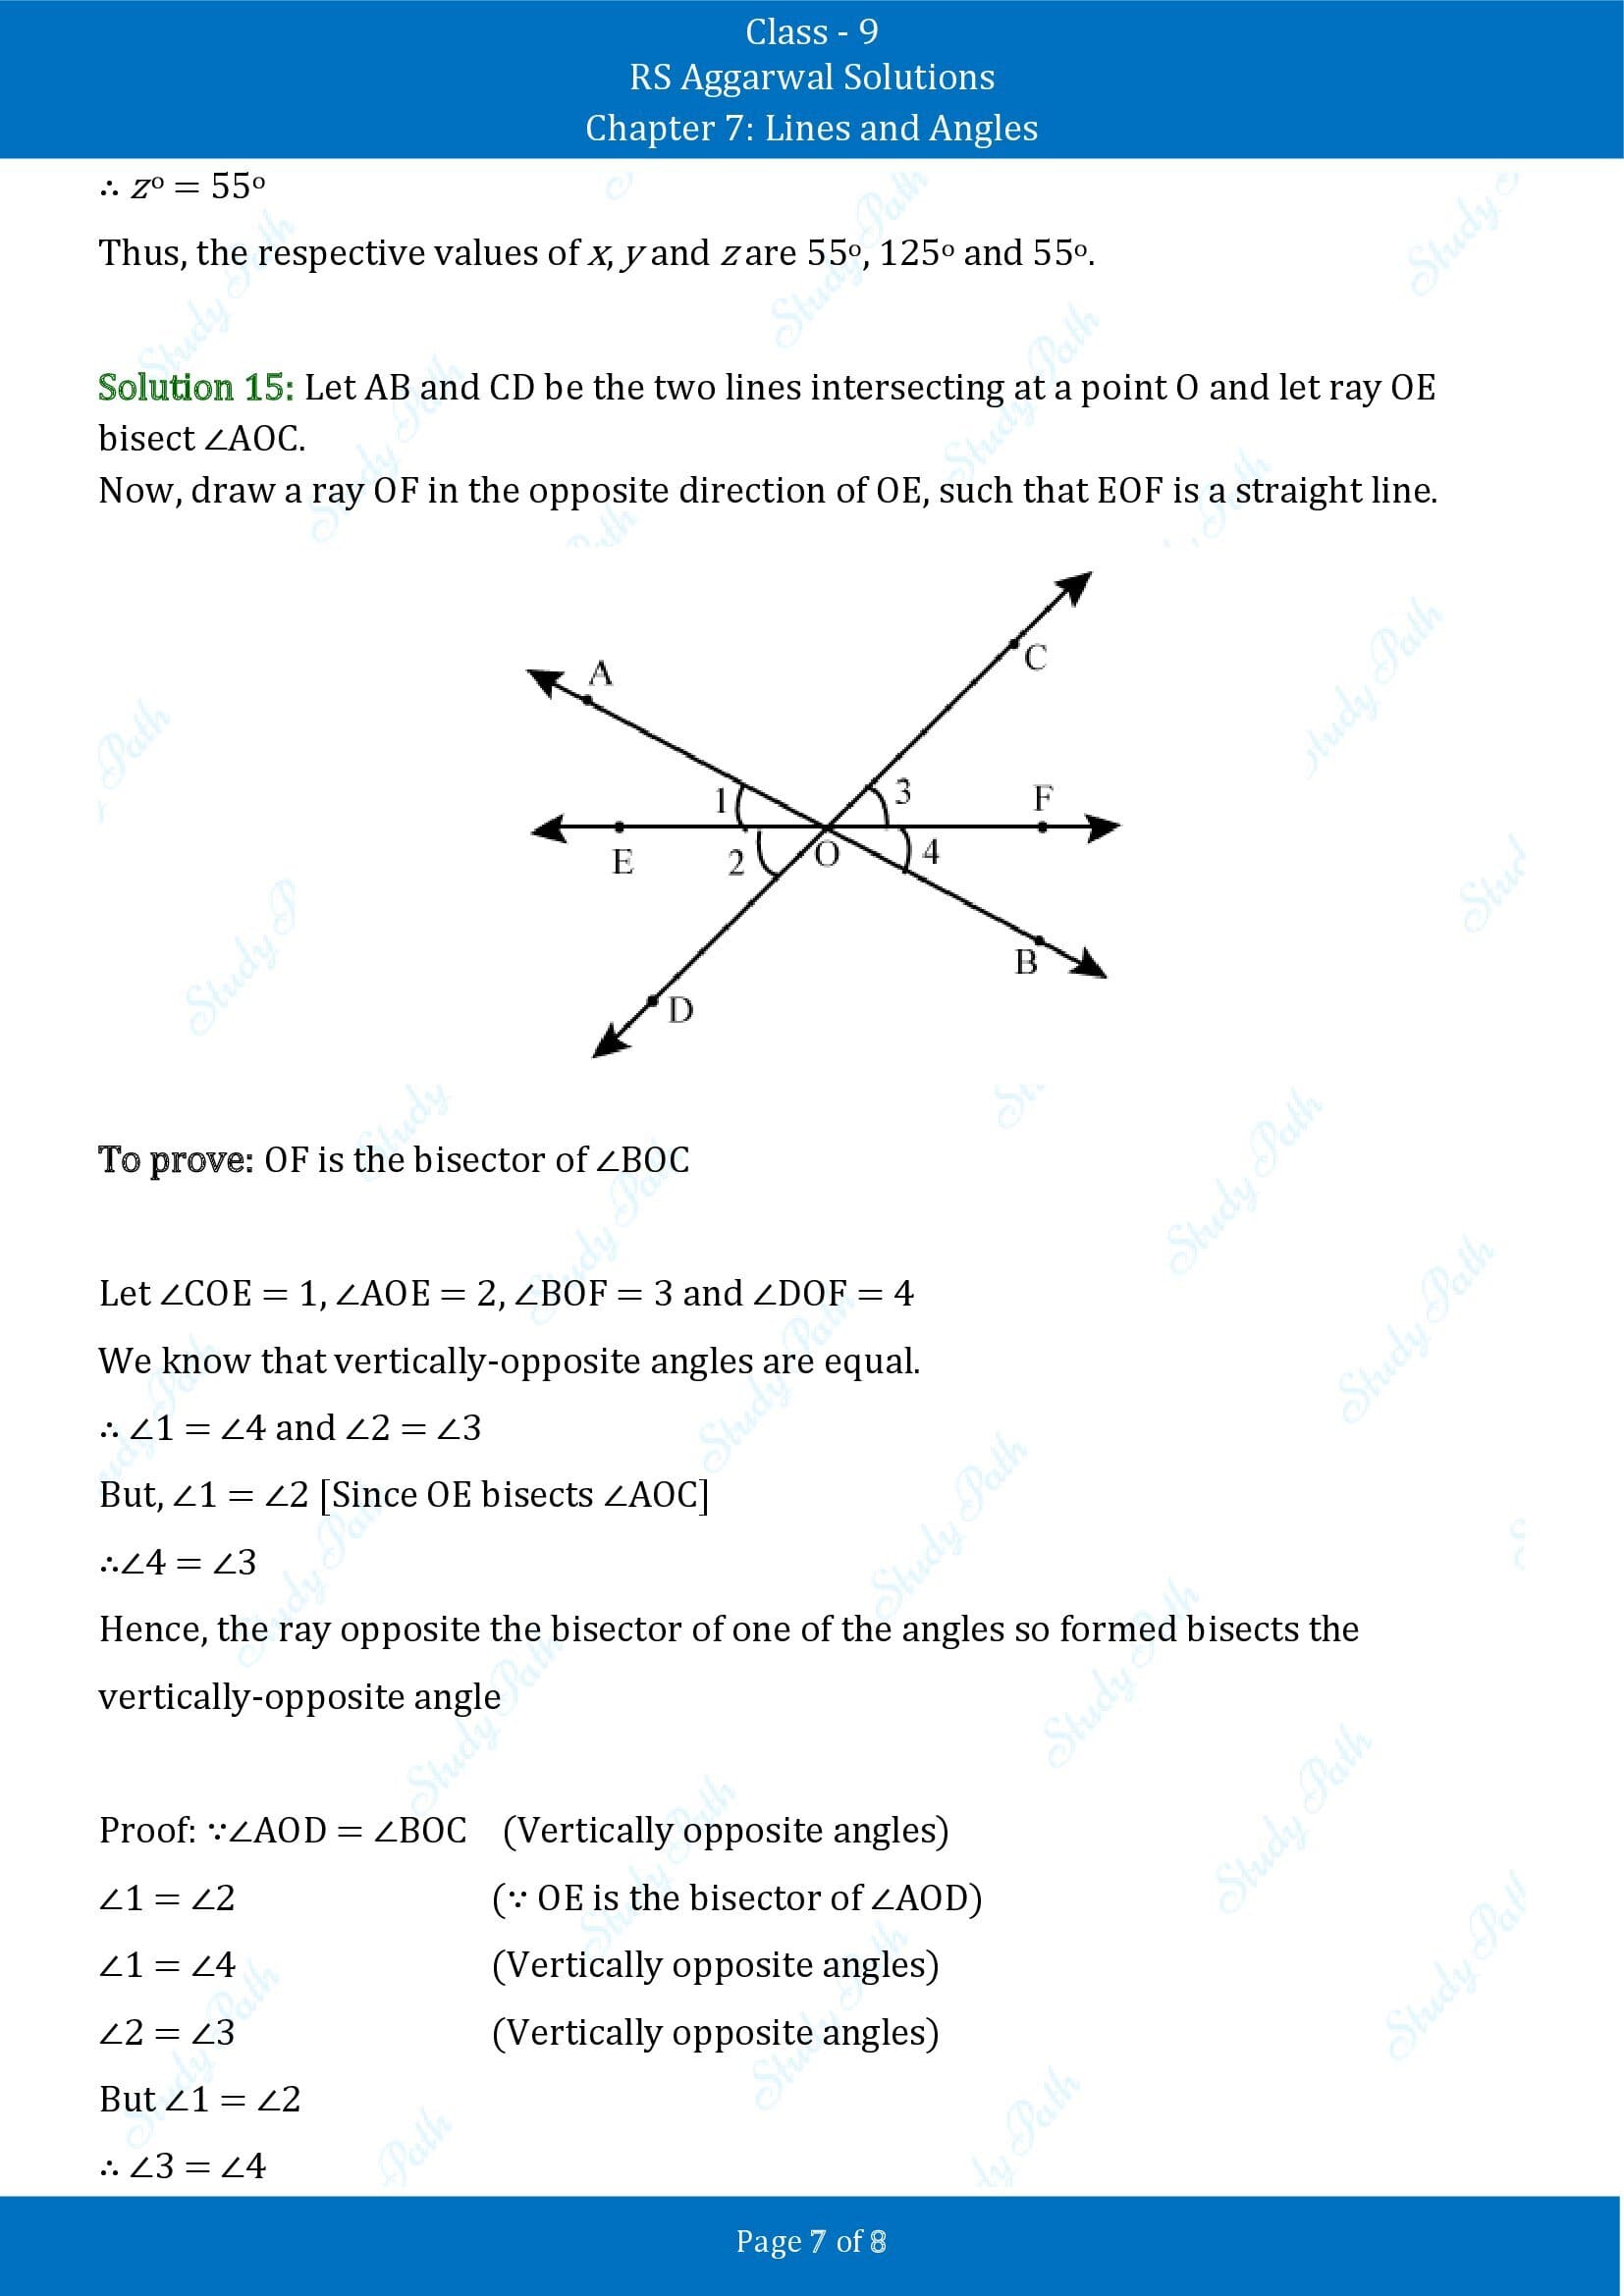 RS Aggarwal Solutions Class 9 Chapter 7 Lines and Angles Exercise 7B 00007